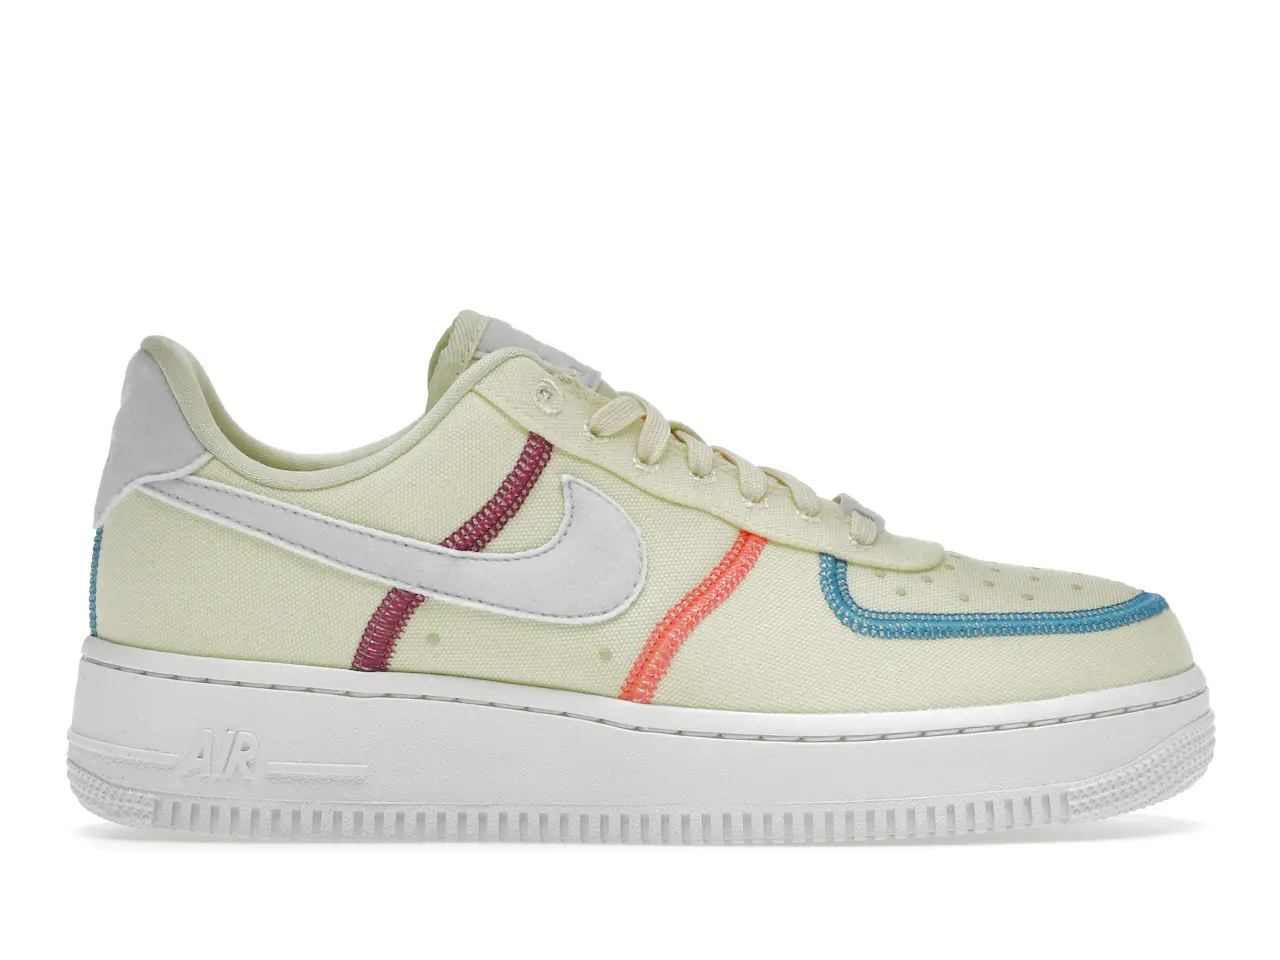 Nike Air Force 1 LX Life Lime (Women's) - CK6572-700 - US